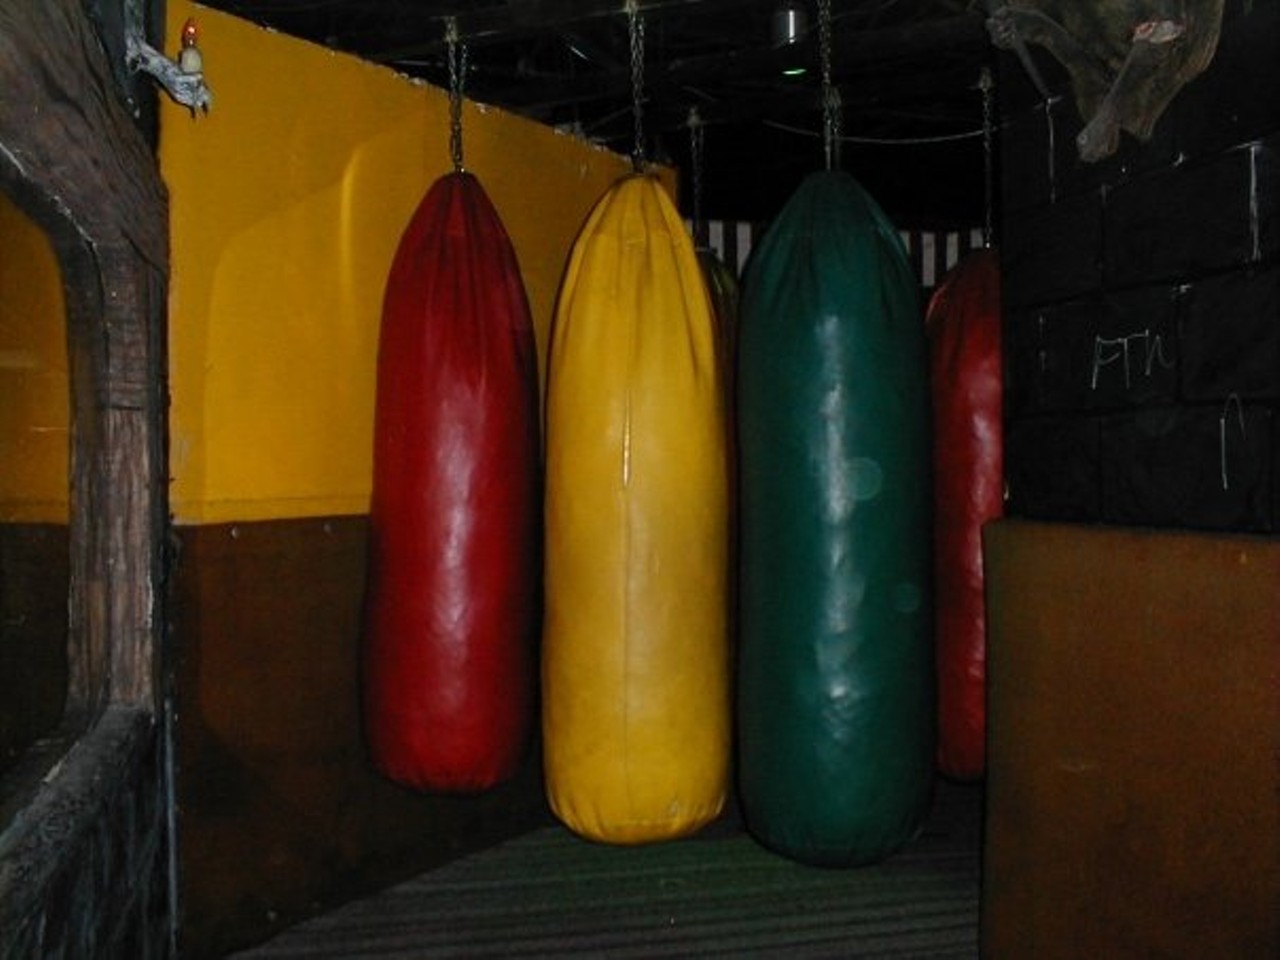 These giant punching bags were part of it. (image via facebook.com/mysteryfunhouse)